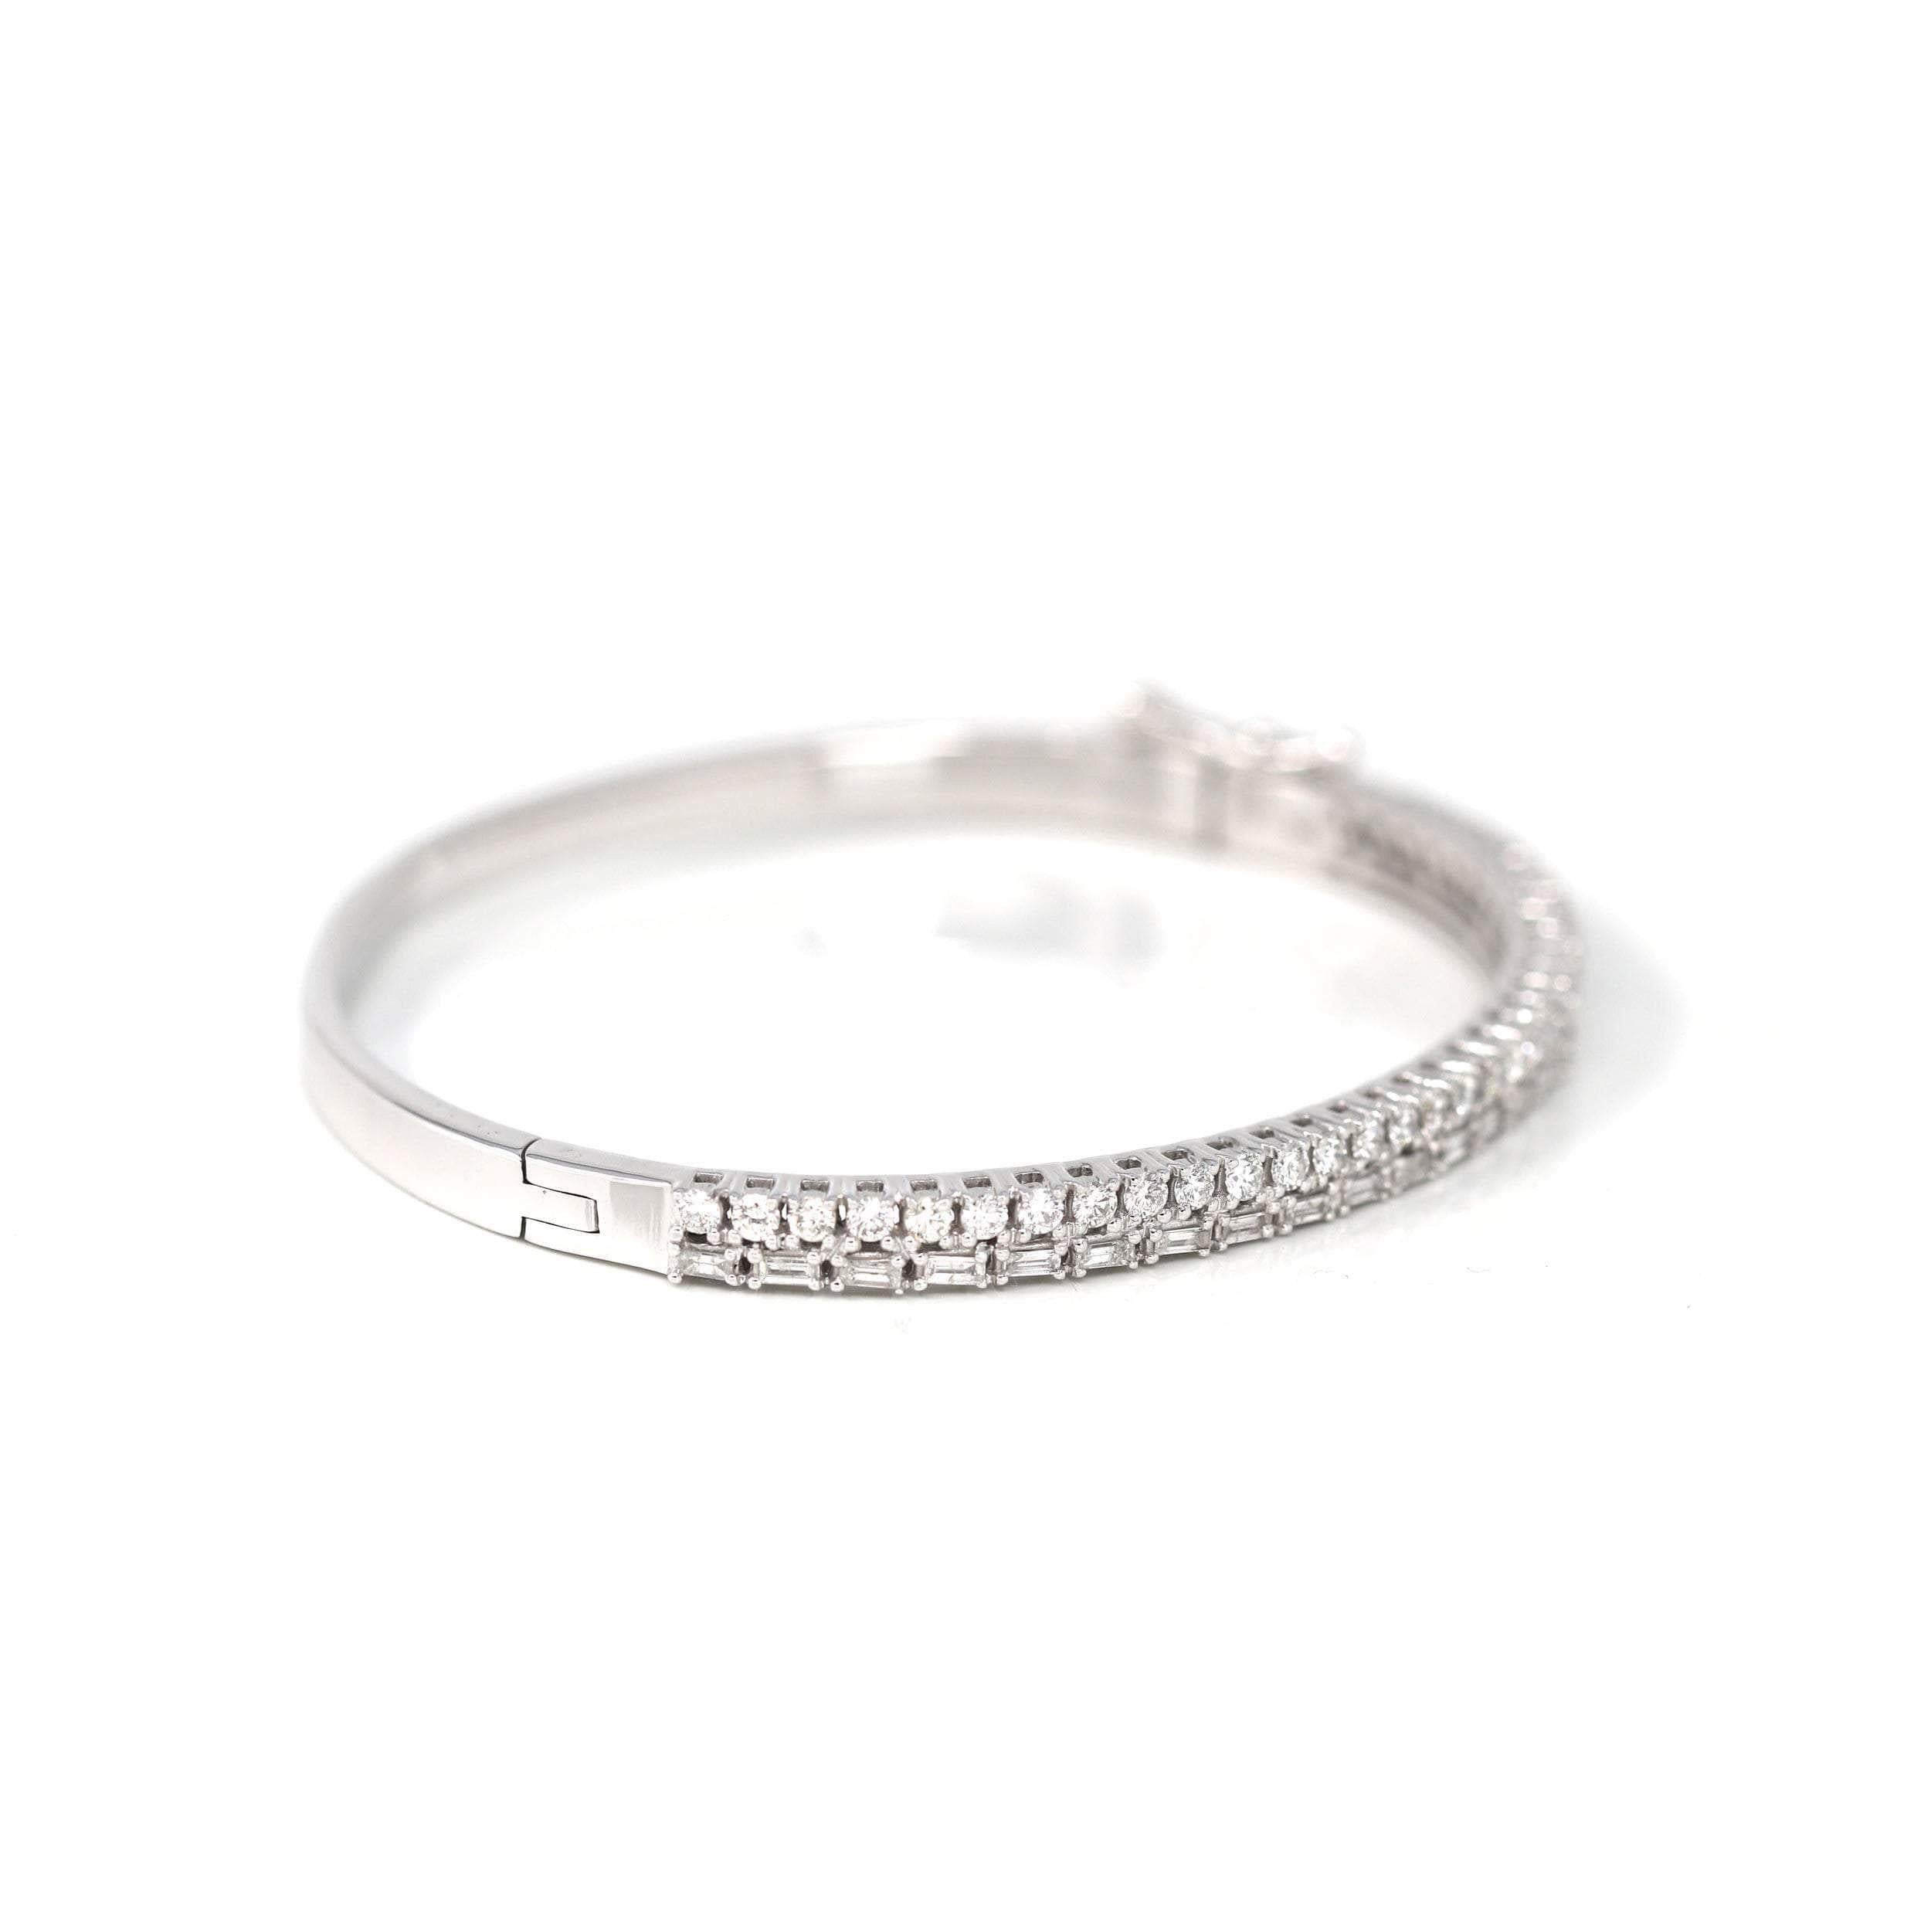 * Design Concept--- She'll love this tennis-look diamond Oval bangle bracelet so much she won't ever want to take it off. Crafted in 14K white gold, this hinged bangle gleams the way around & emerald with shimmering 1.64 ct diamonds in four-prong